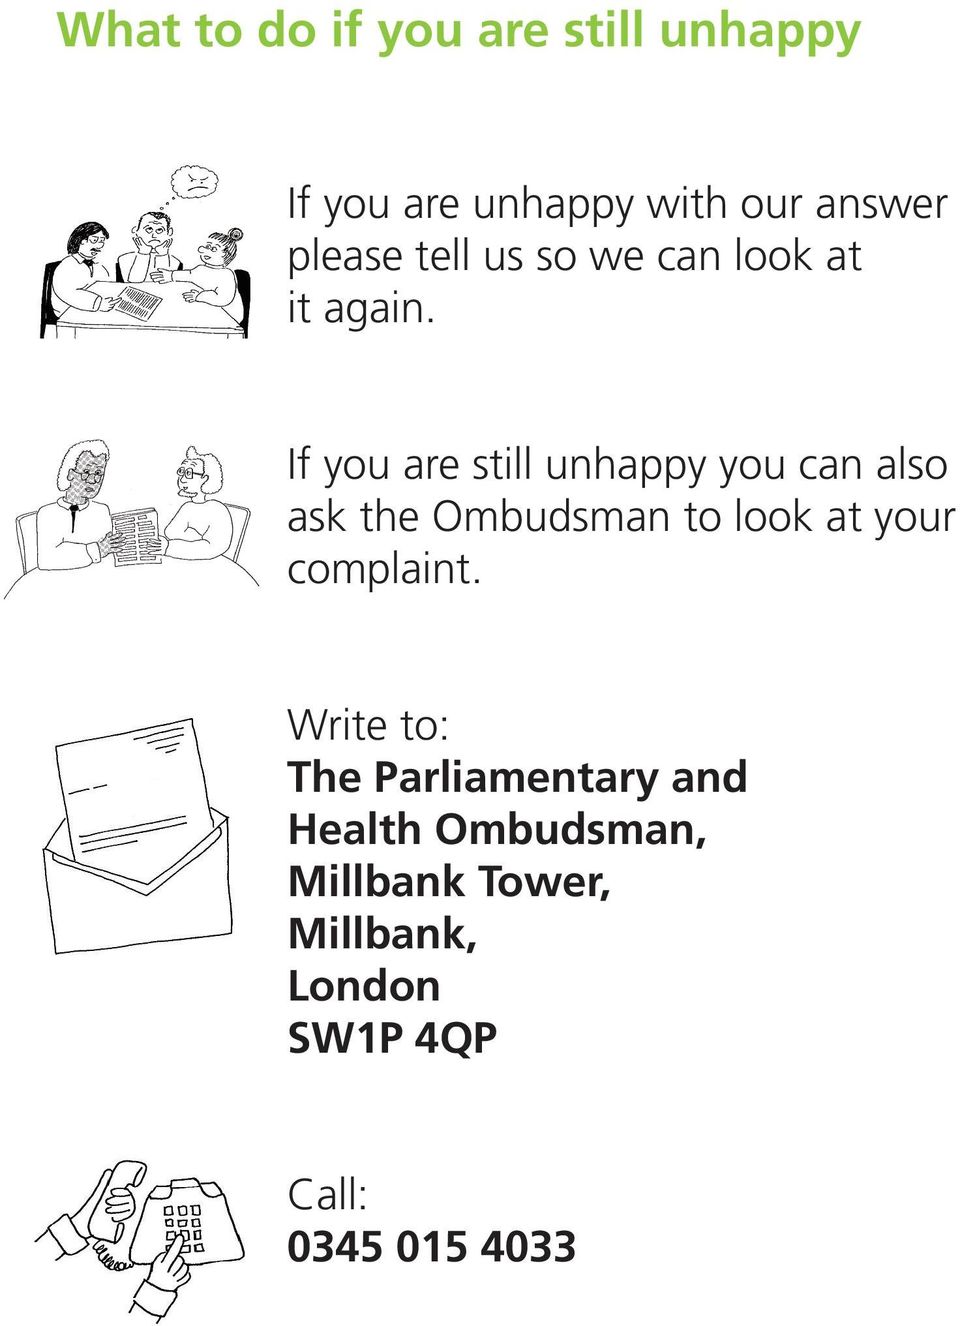 If you are still unhappy you can also ask the Ombudsman to look at your